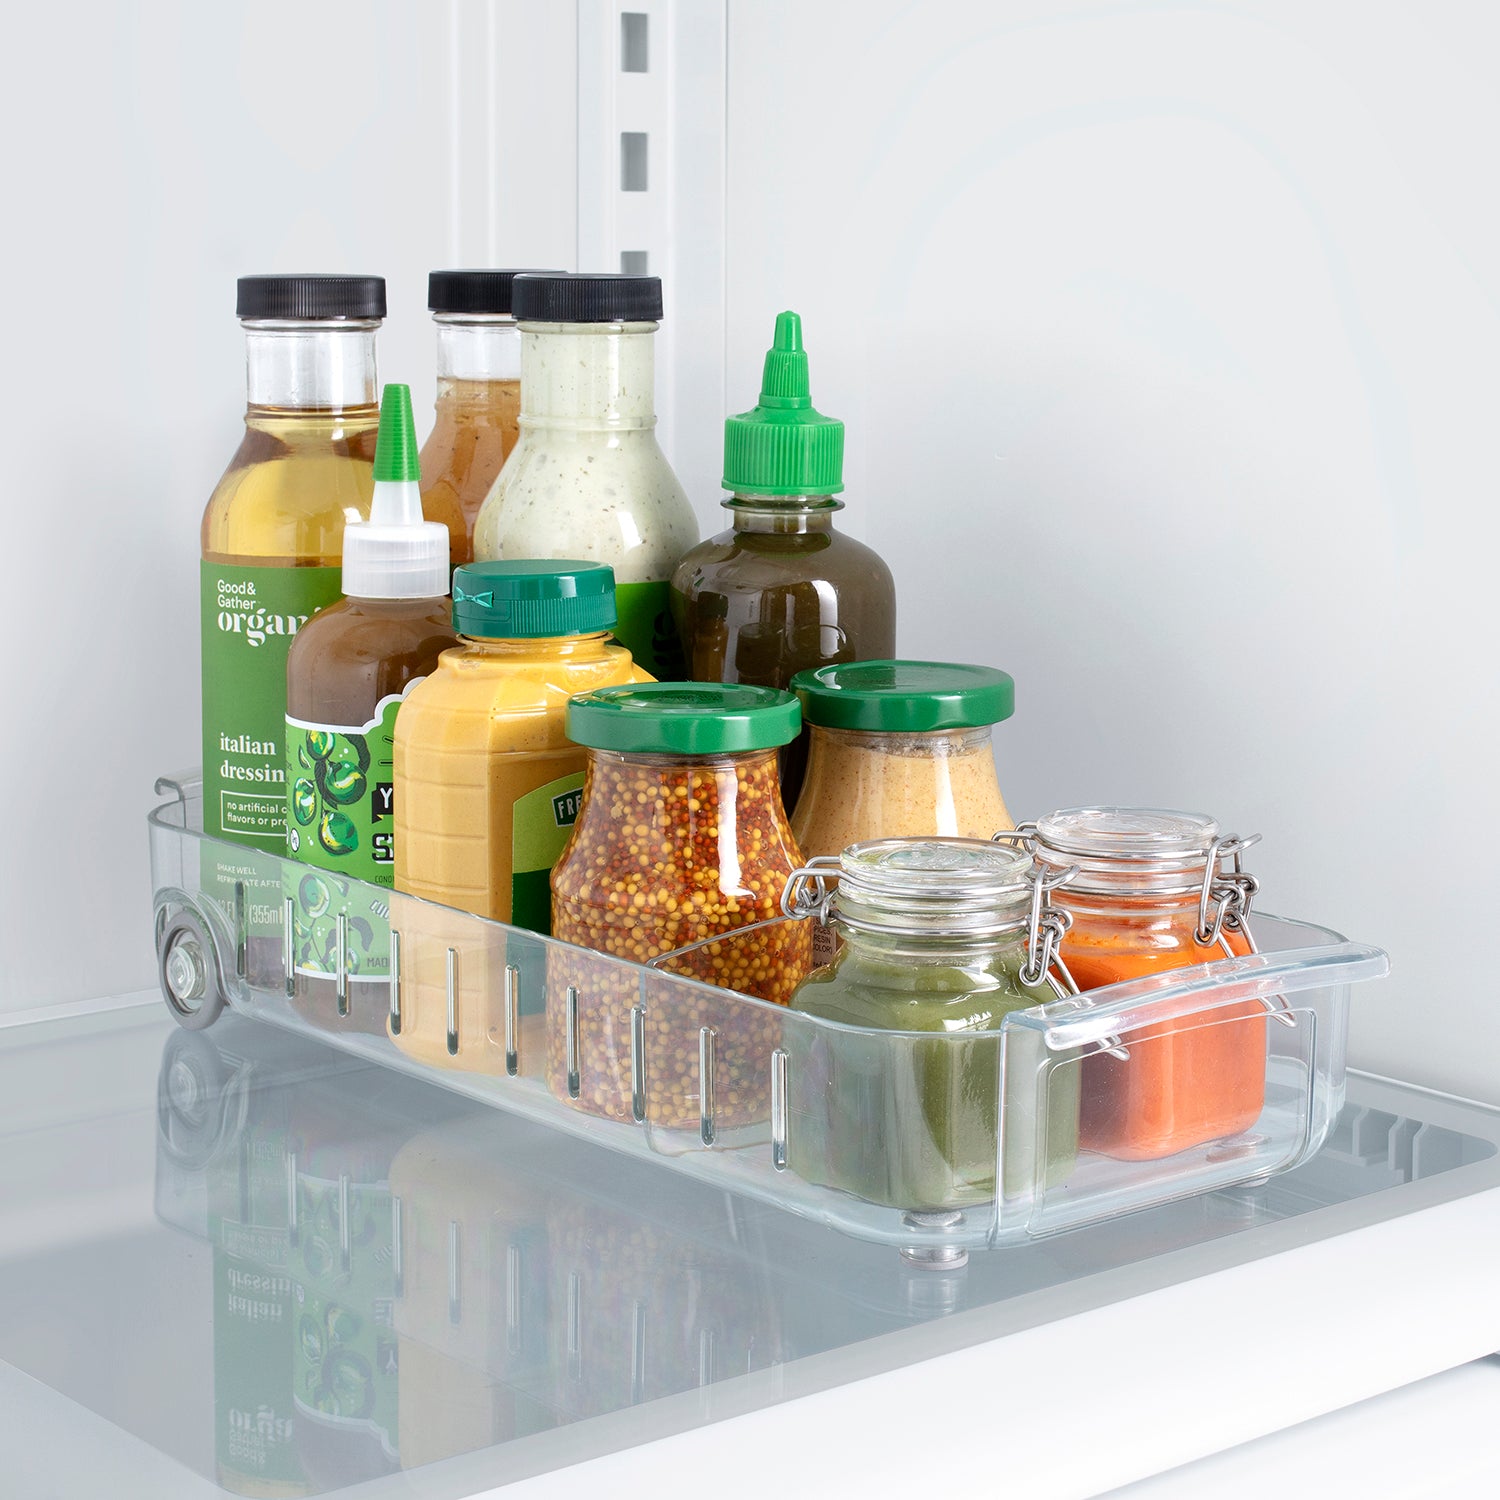 Youcopia 9x15 Bpa-free Plastic Rollout Fridge Caddy - Clear : Target